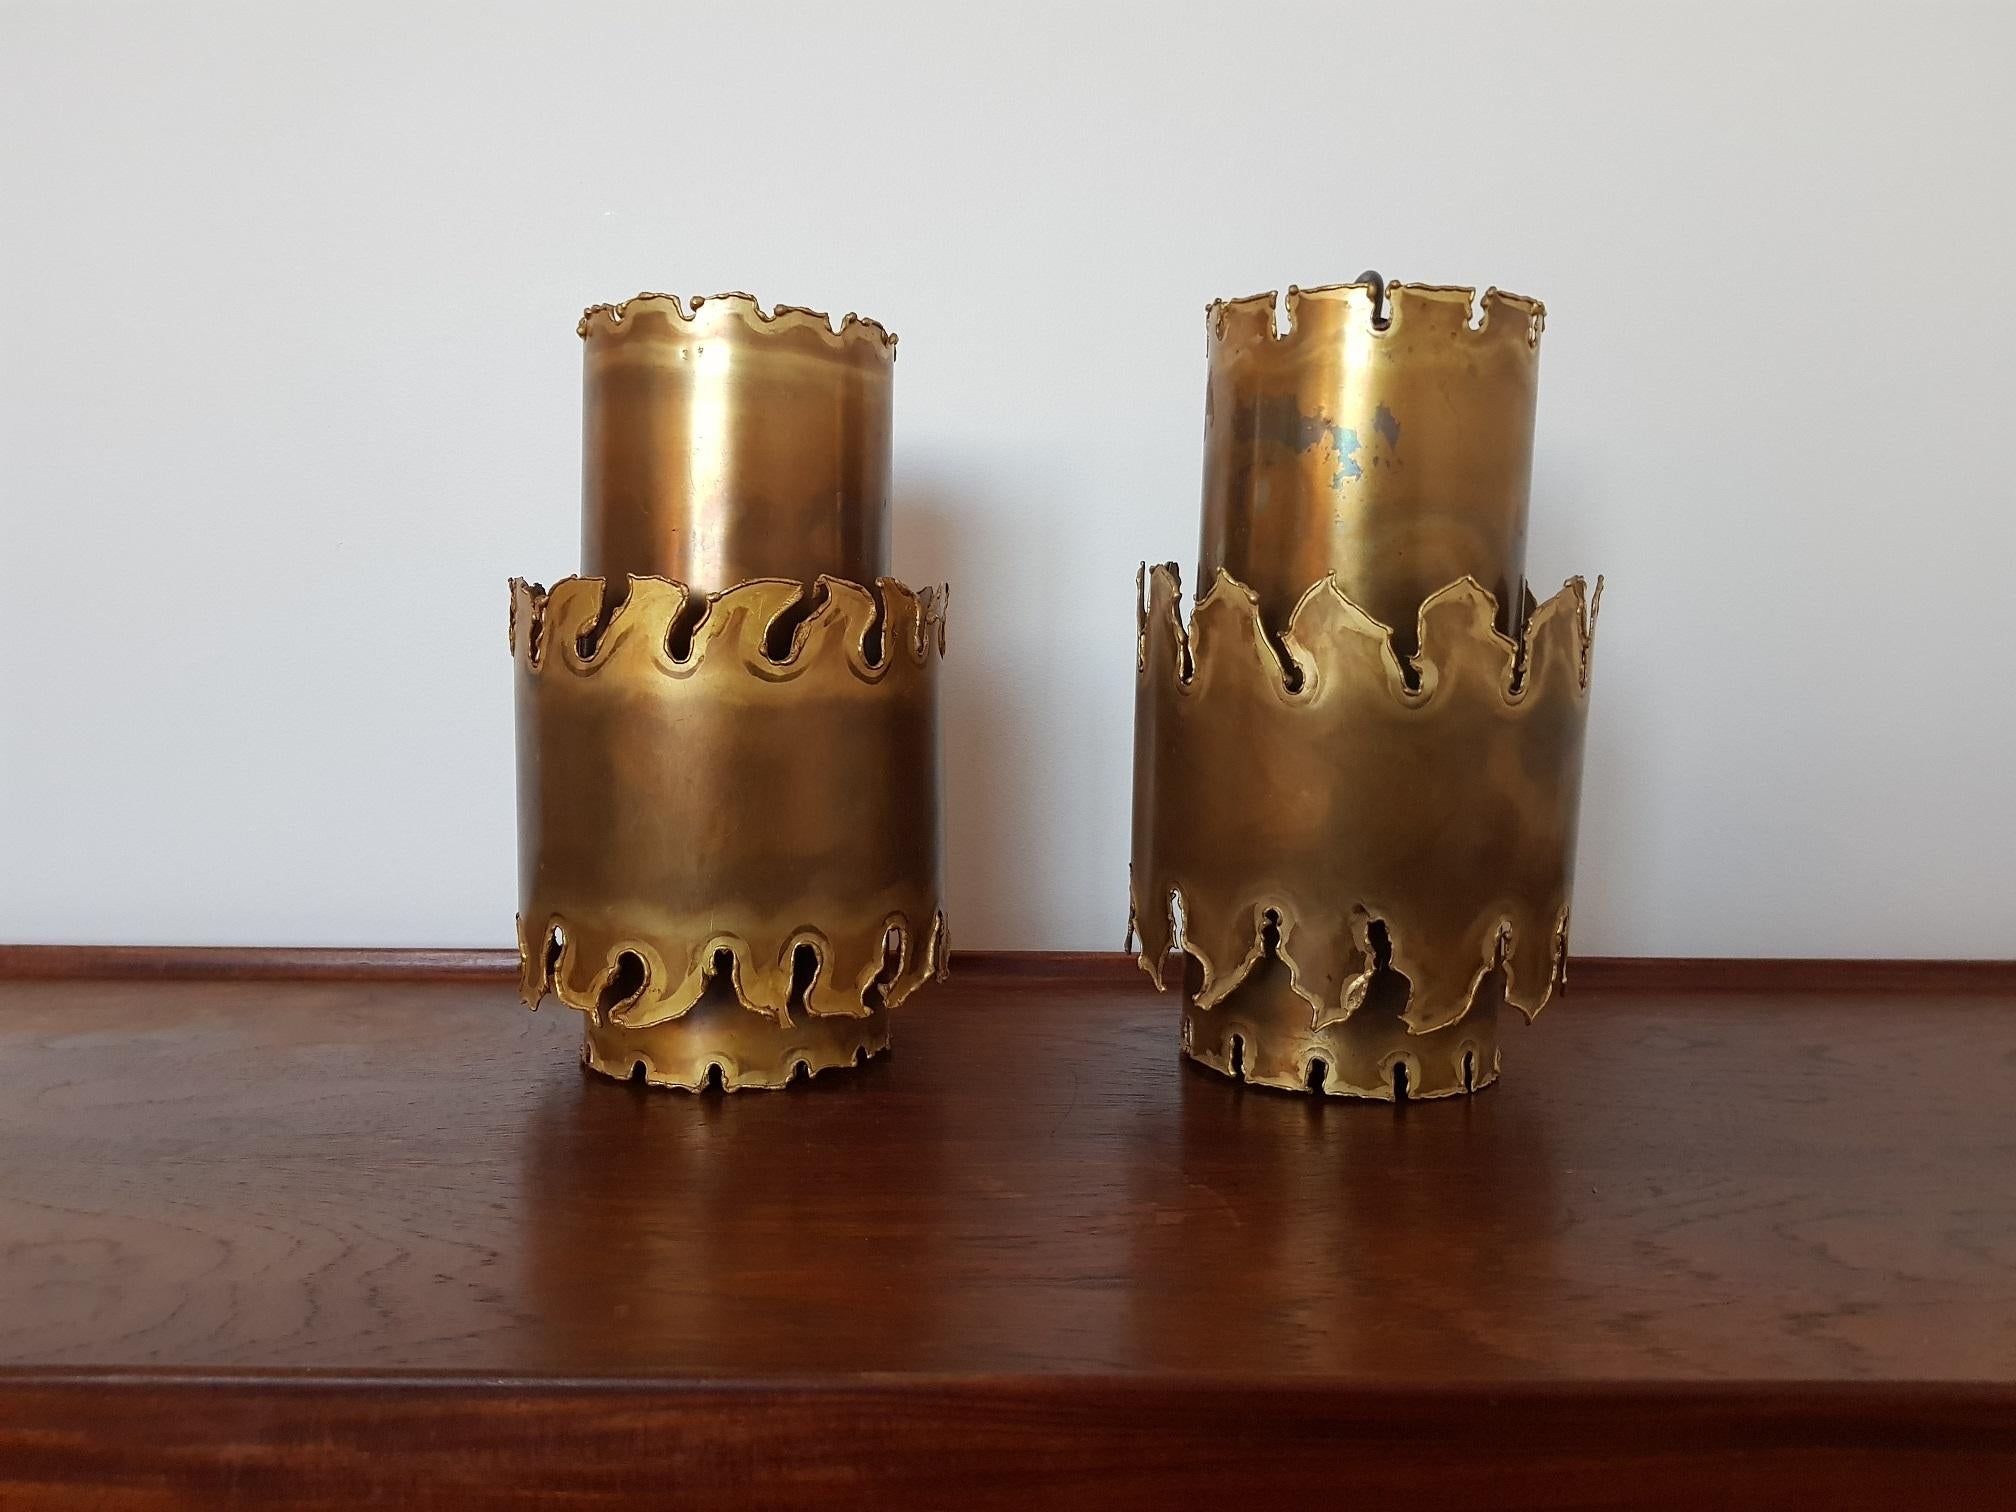 Svend Aage Holm Sorensen 2 Brutalist Ceiling Lamps 1960s for Holm Sorensen & Co In Good Condition For Sale In Limhamn, SE